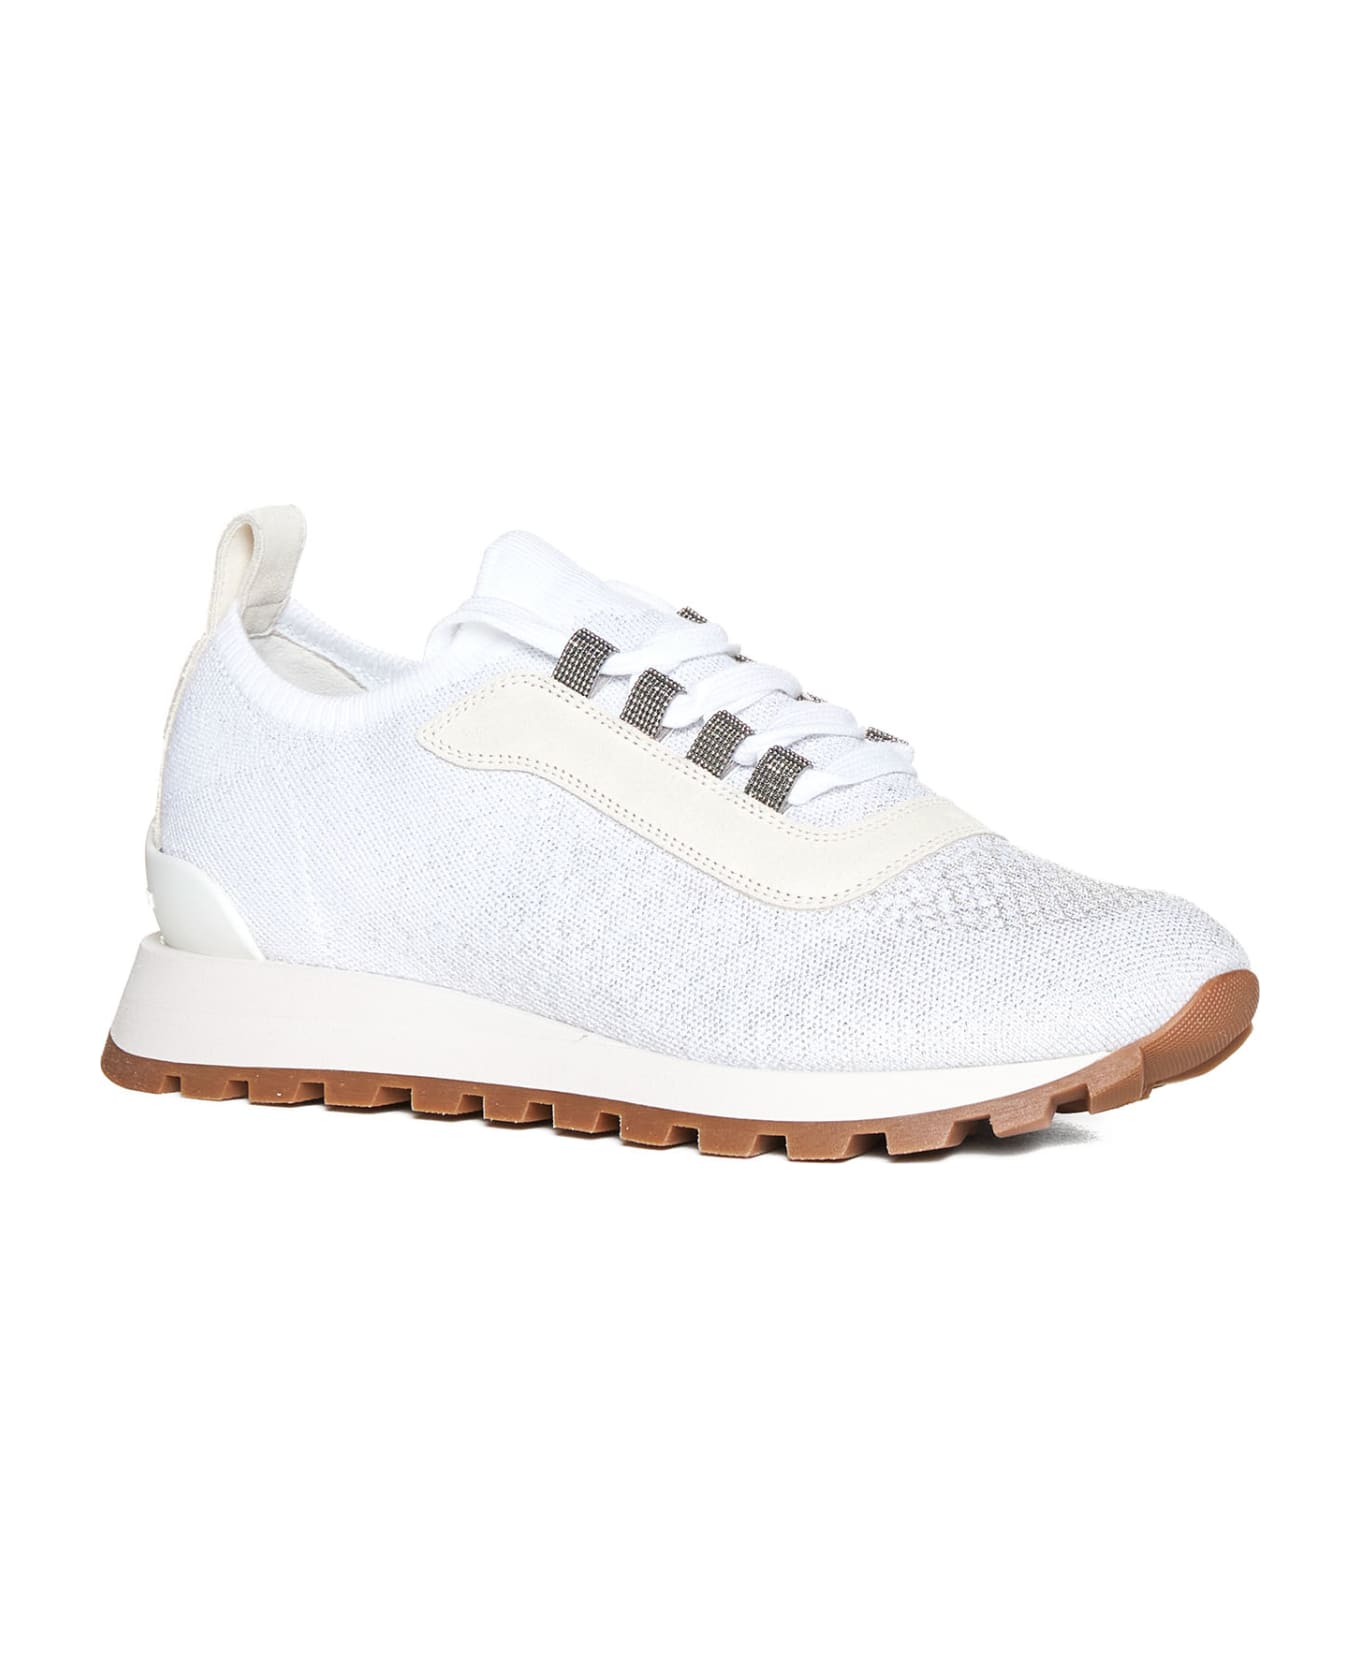 Brunello Cucinelli Knitted Lace-up Sneakers - Bianco スニーカー